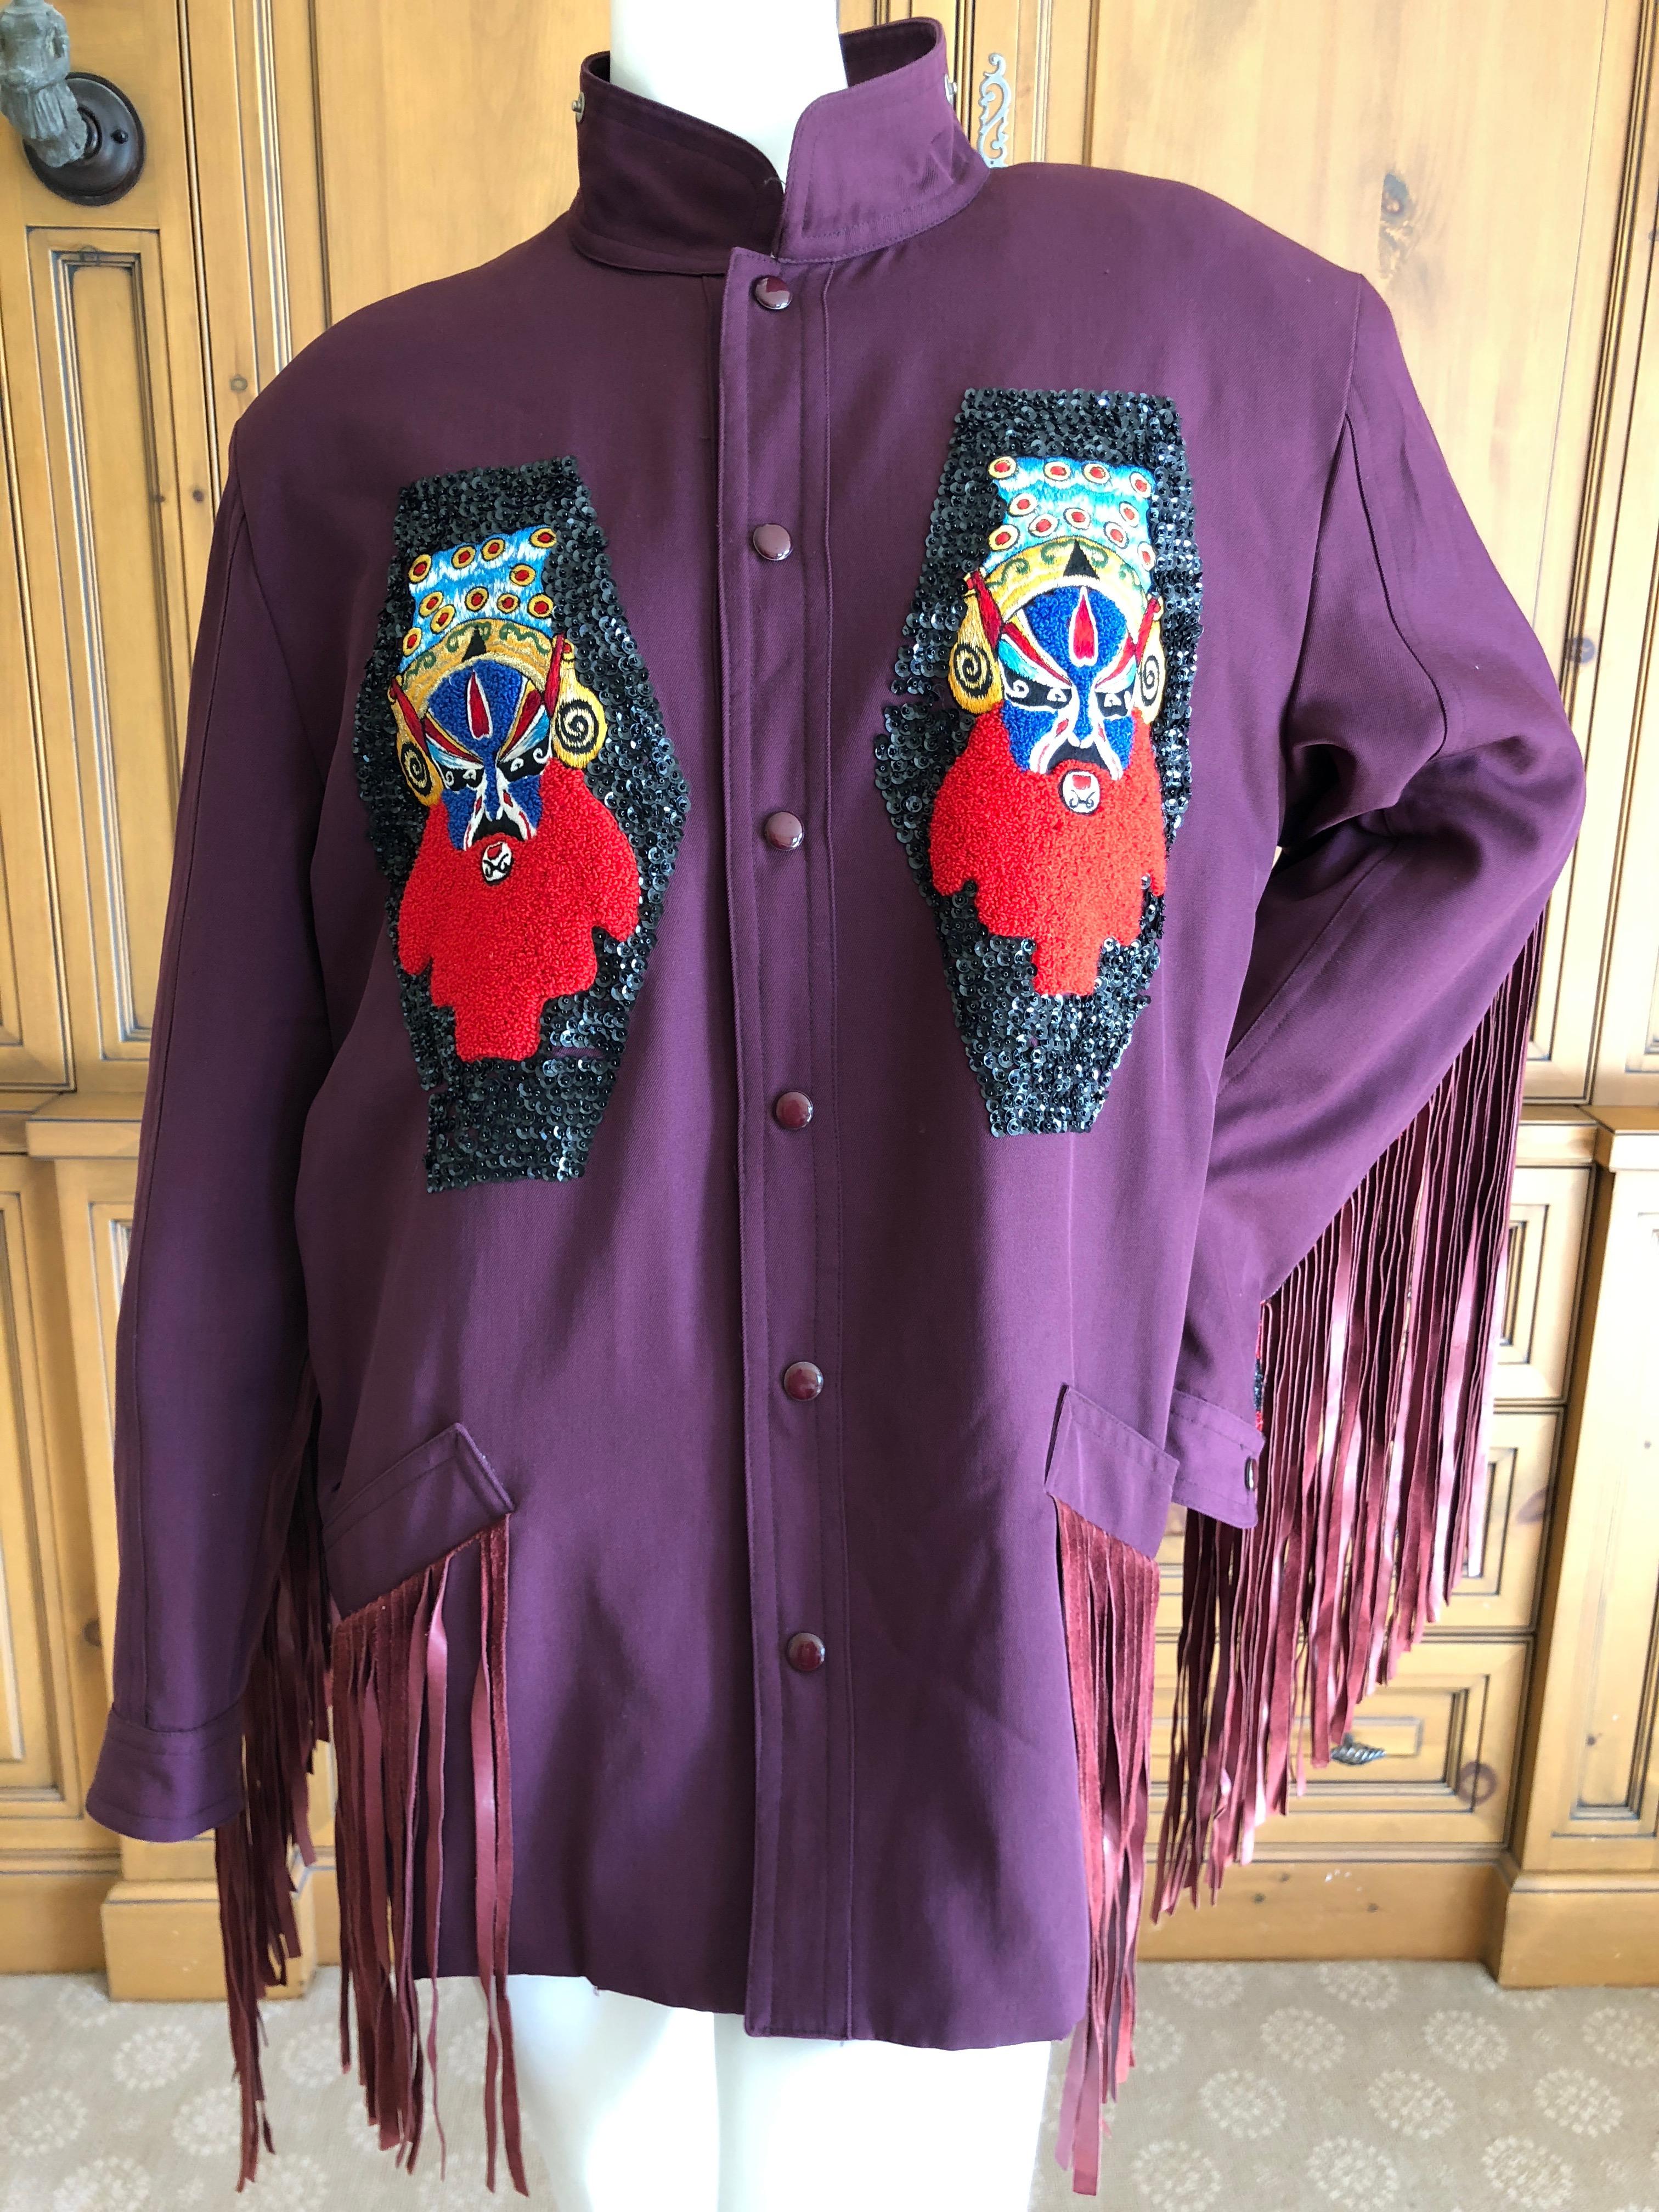 KANSAI YAMAMOTO 1981 Rare Collectible Unisex Embellished Jacket w Suede Fringe

Kansai Typhoon on back, twin  Kabuki mask embroidered on the front.
Will fit men or women.
Chest/Bust 48